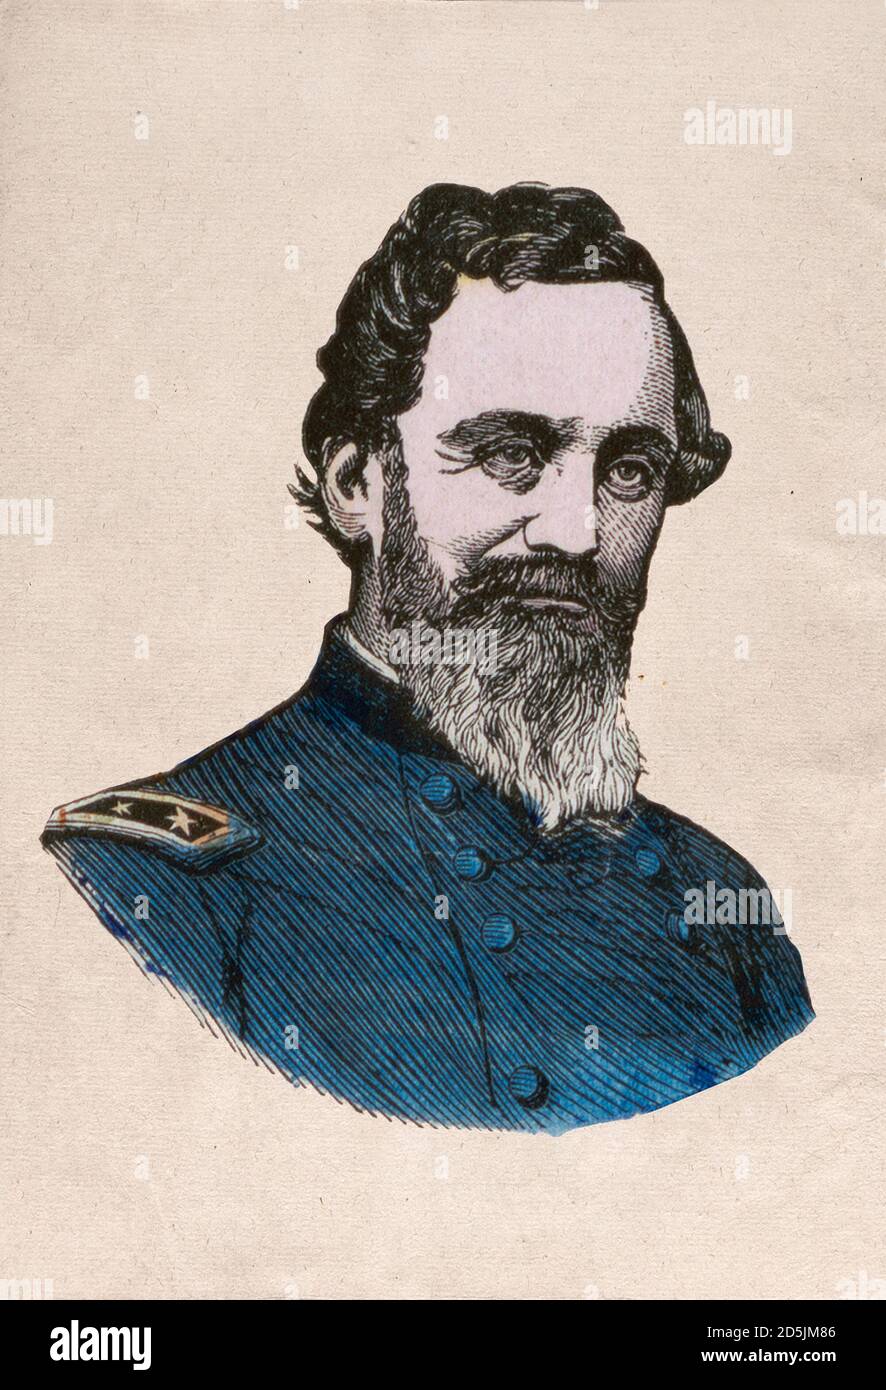 Portrait of general Sedgwick. John Sedgwick (1813 – 1864) was a military officer and Union Army general during the American Civil War. Stock Photo